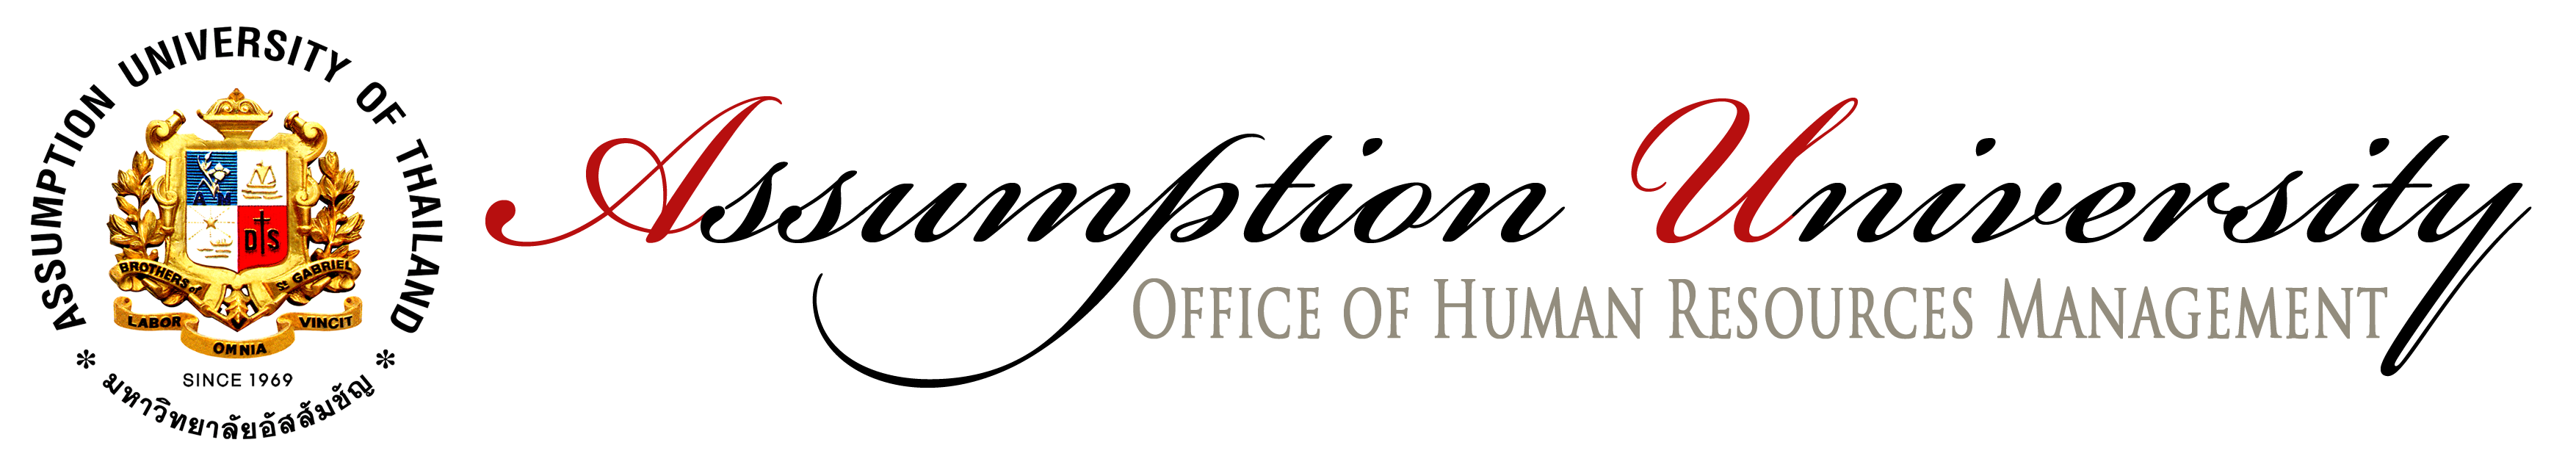 Office of Human Resources Management (OHRM)